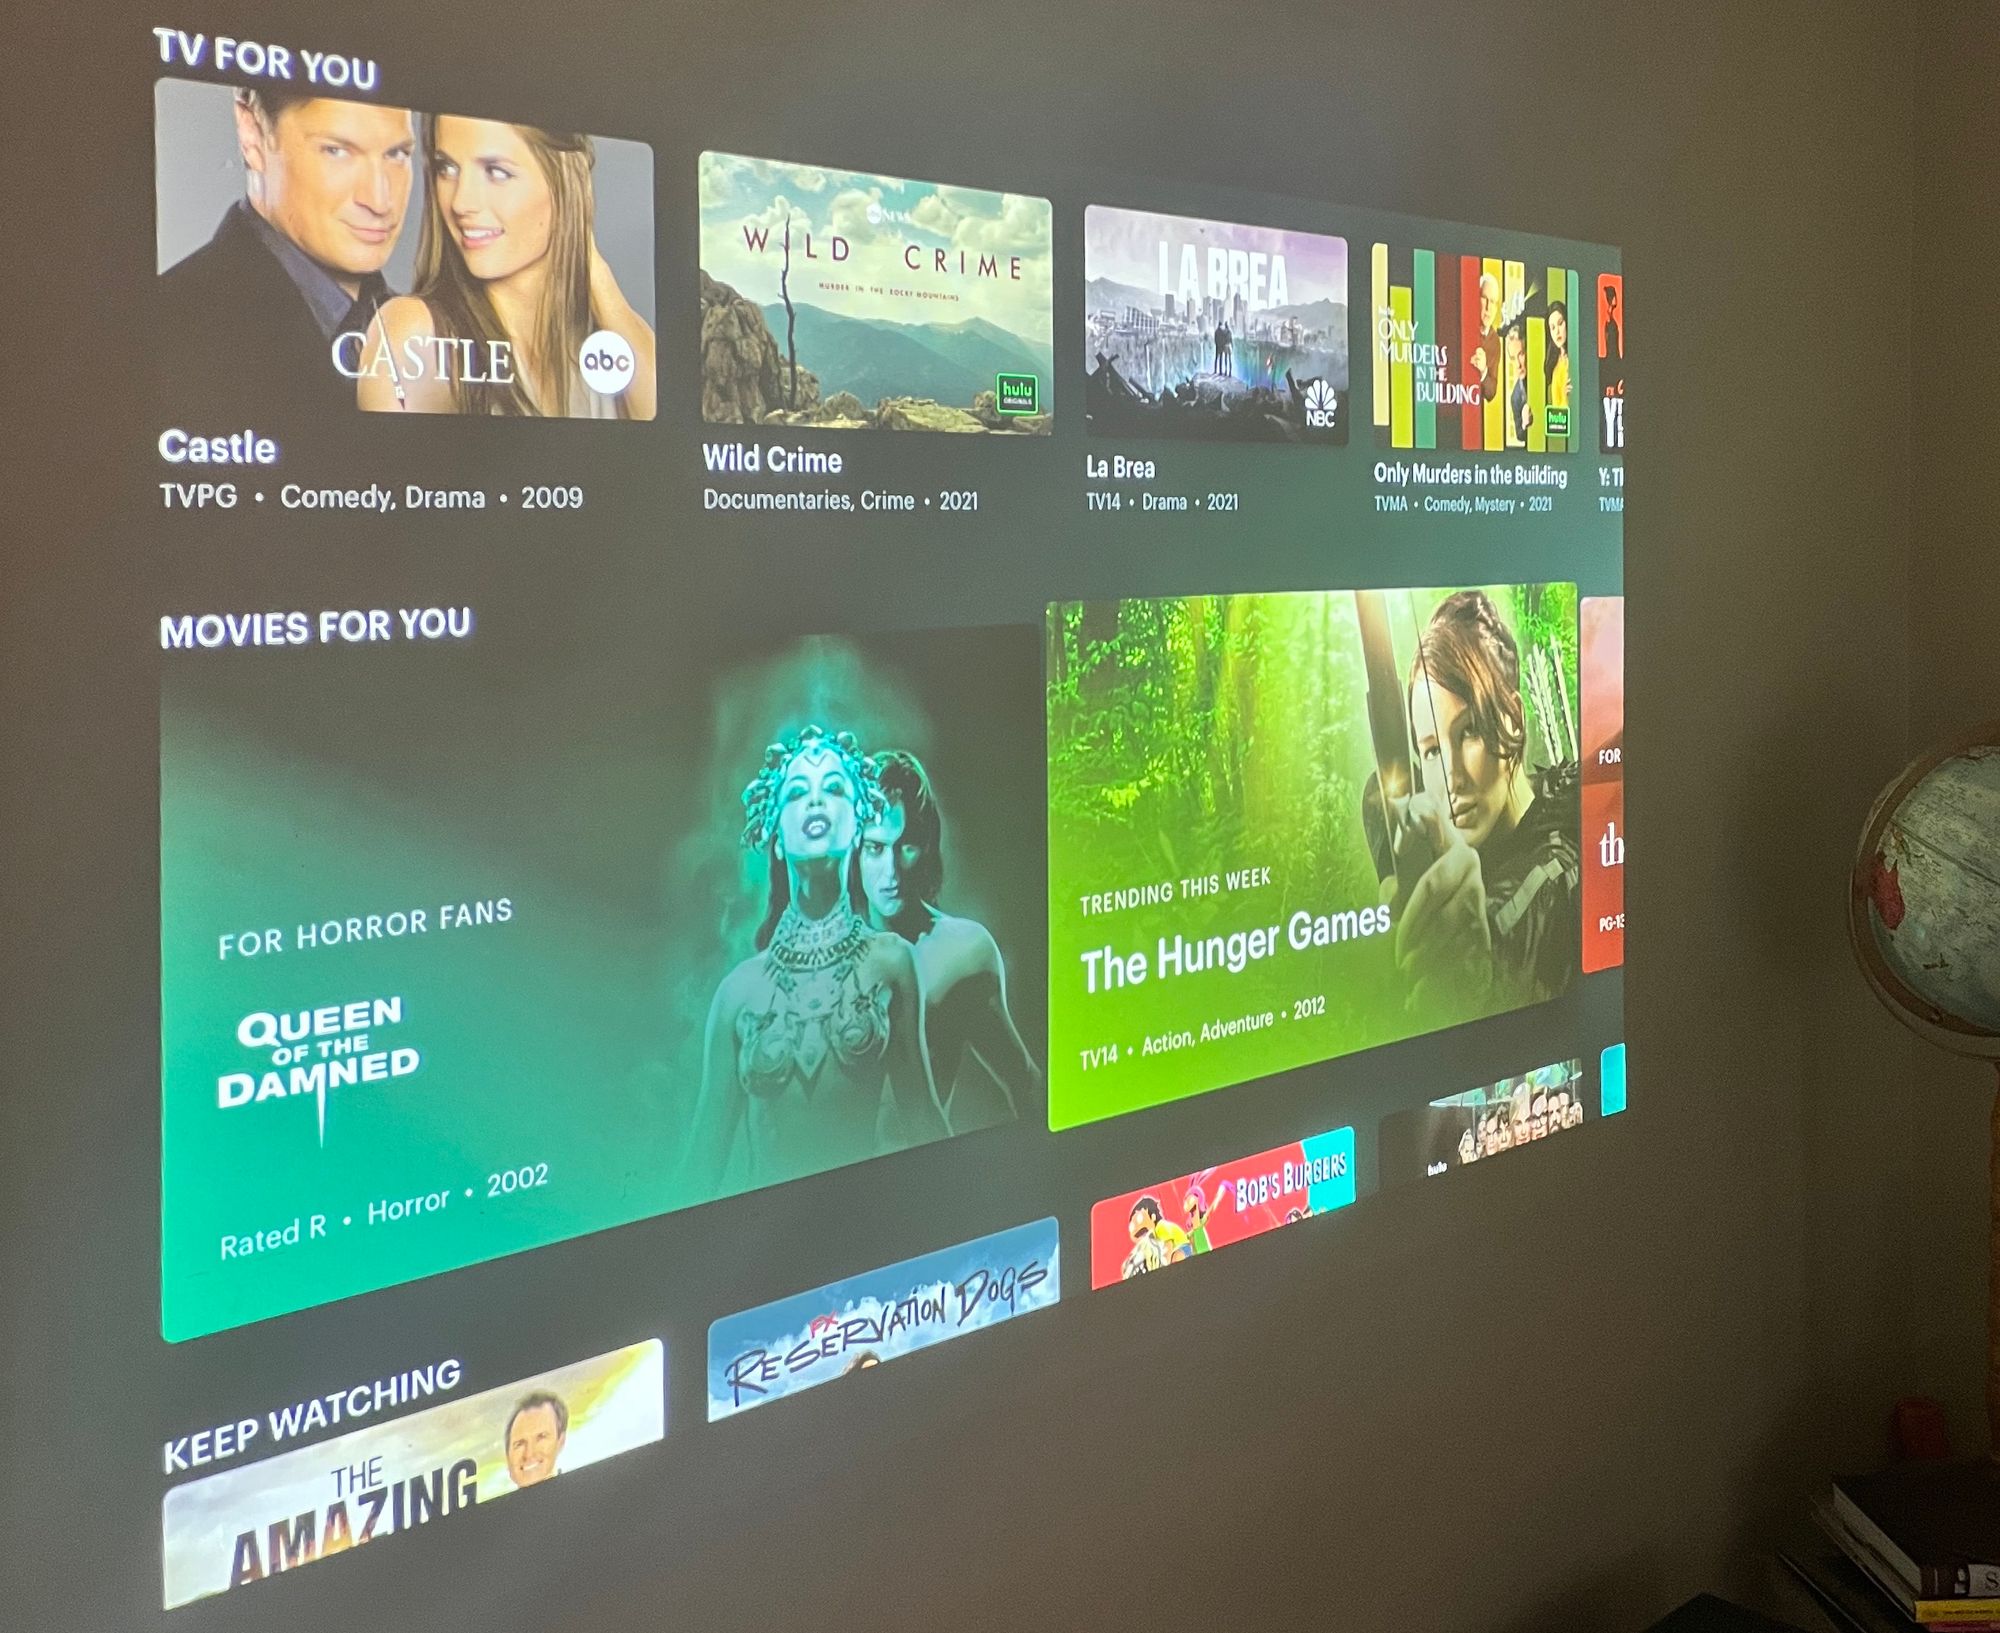 Hulu: Where TV "for me" is just what's new